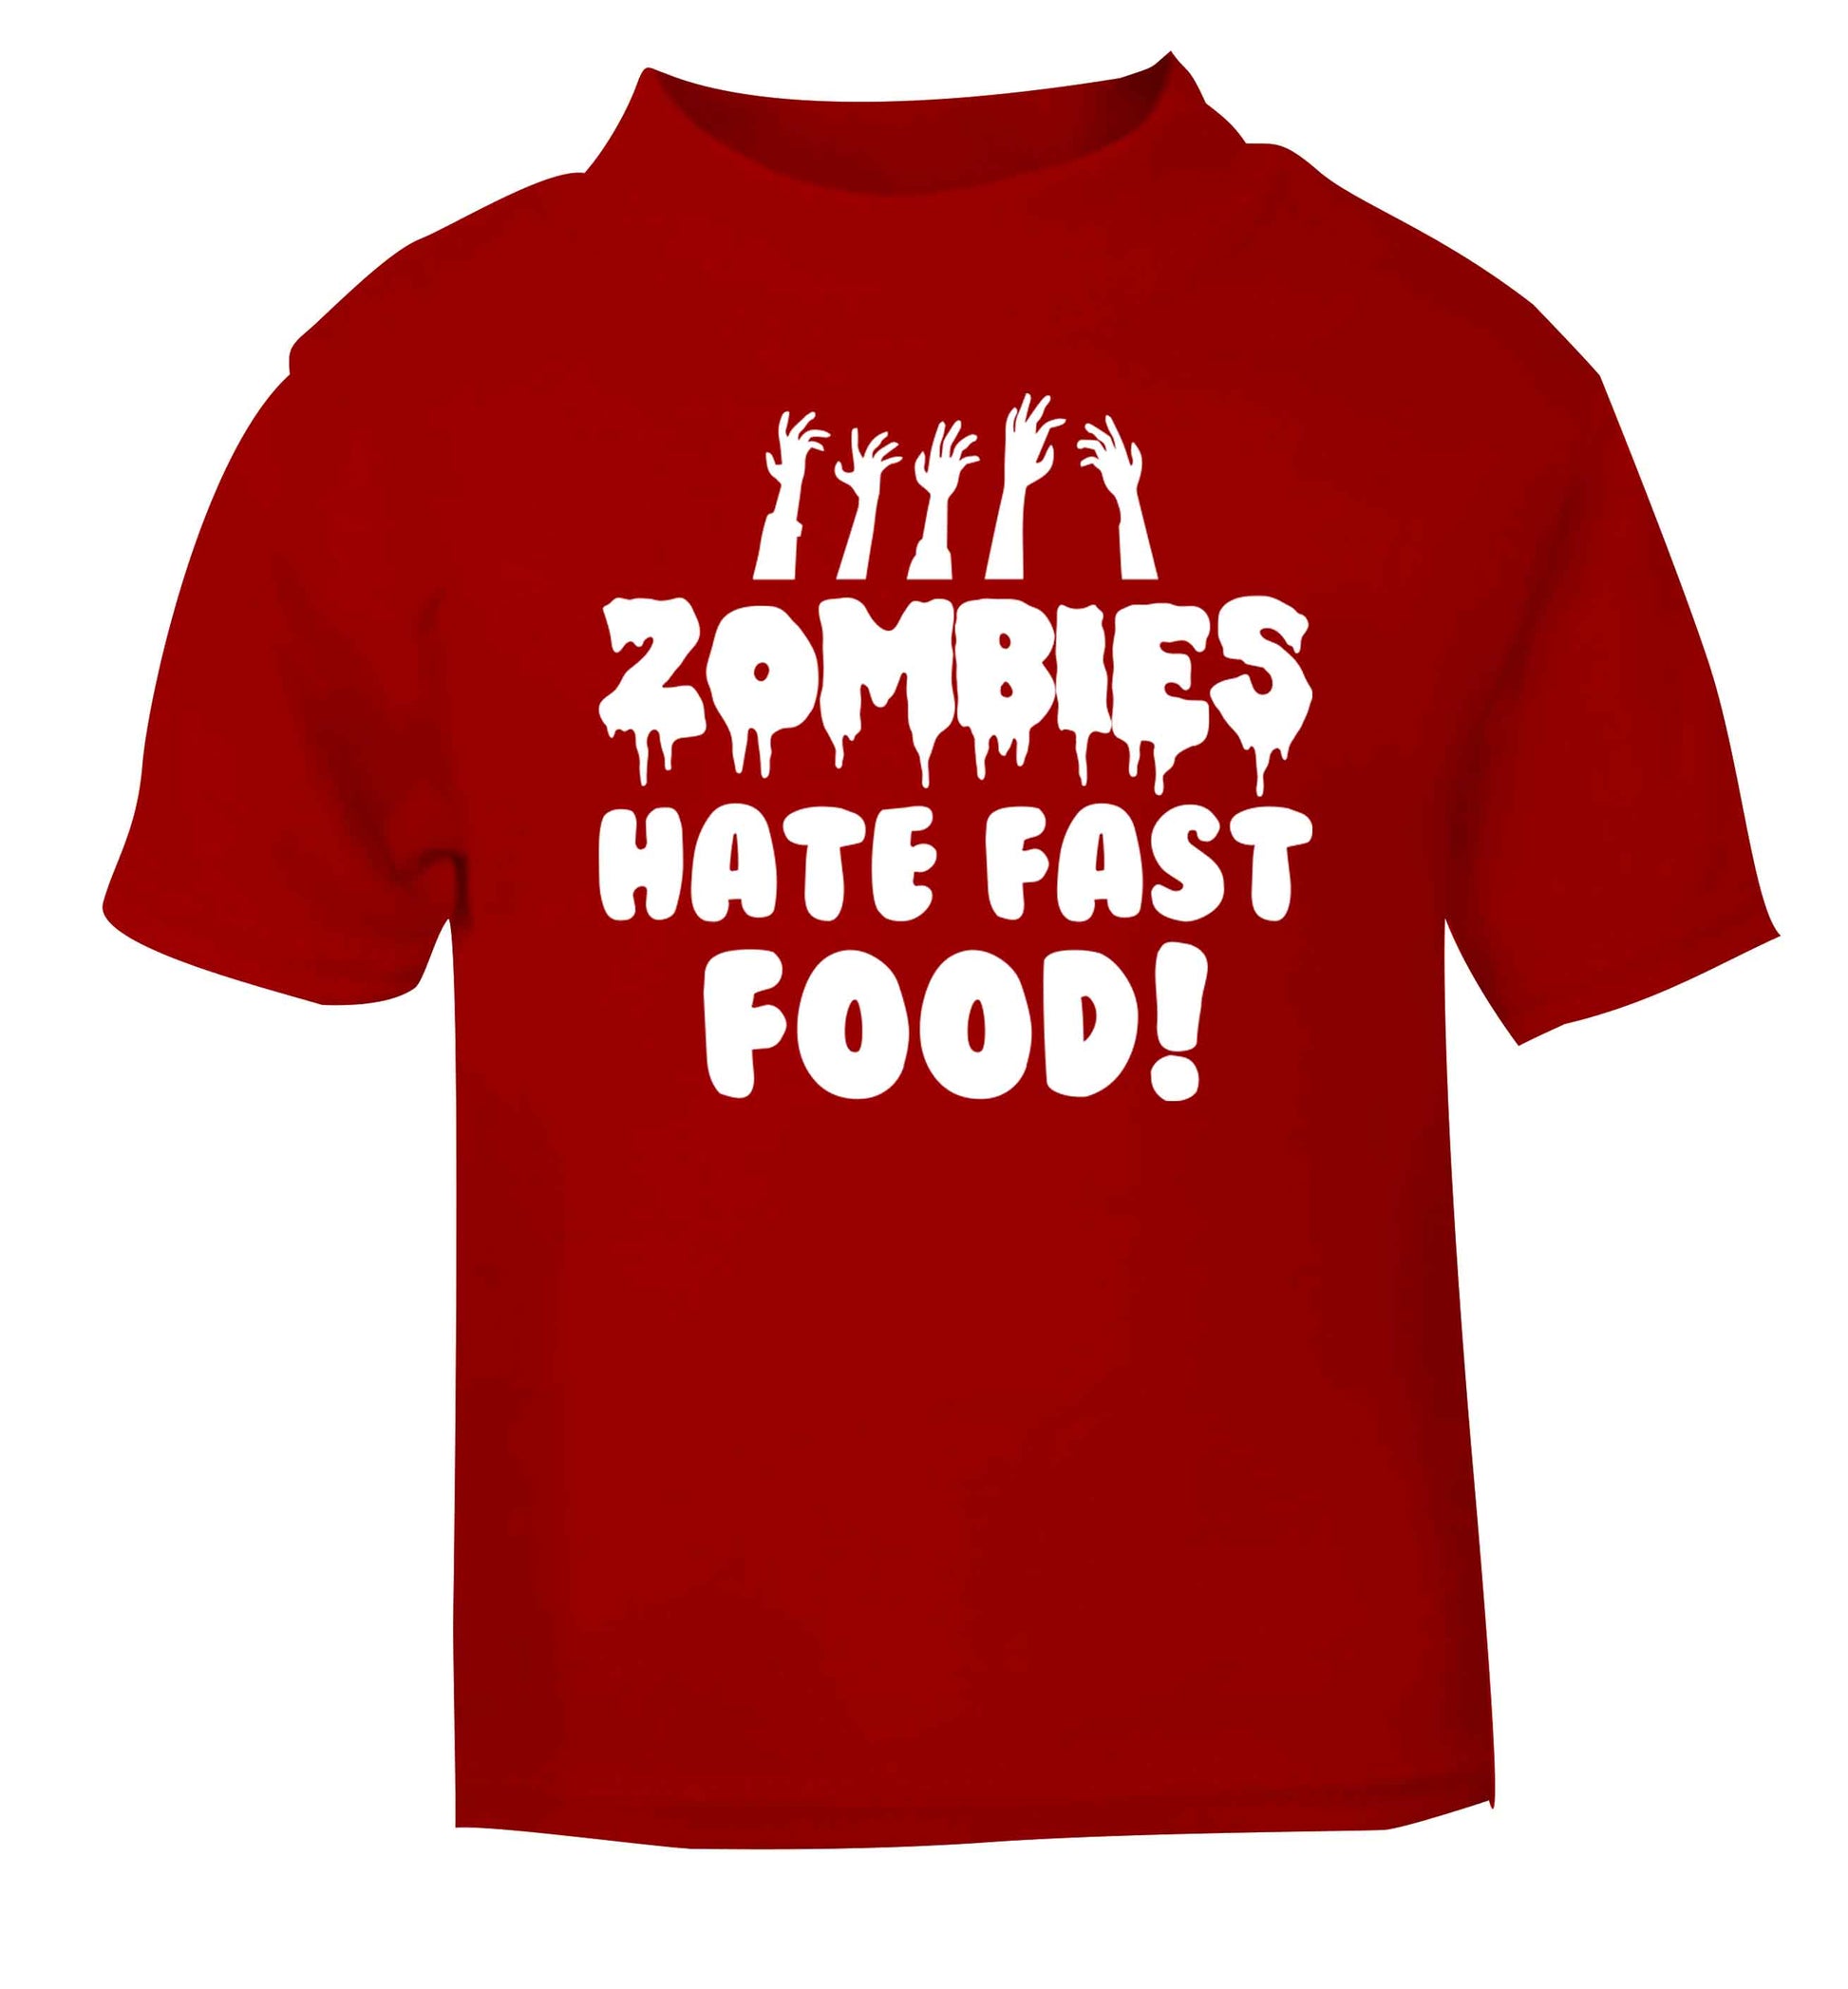 Zombies hate fast food red baby toddler Tshirt 2 Years